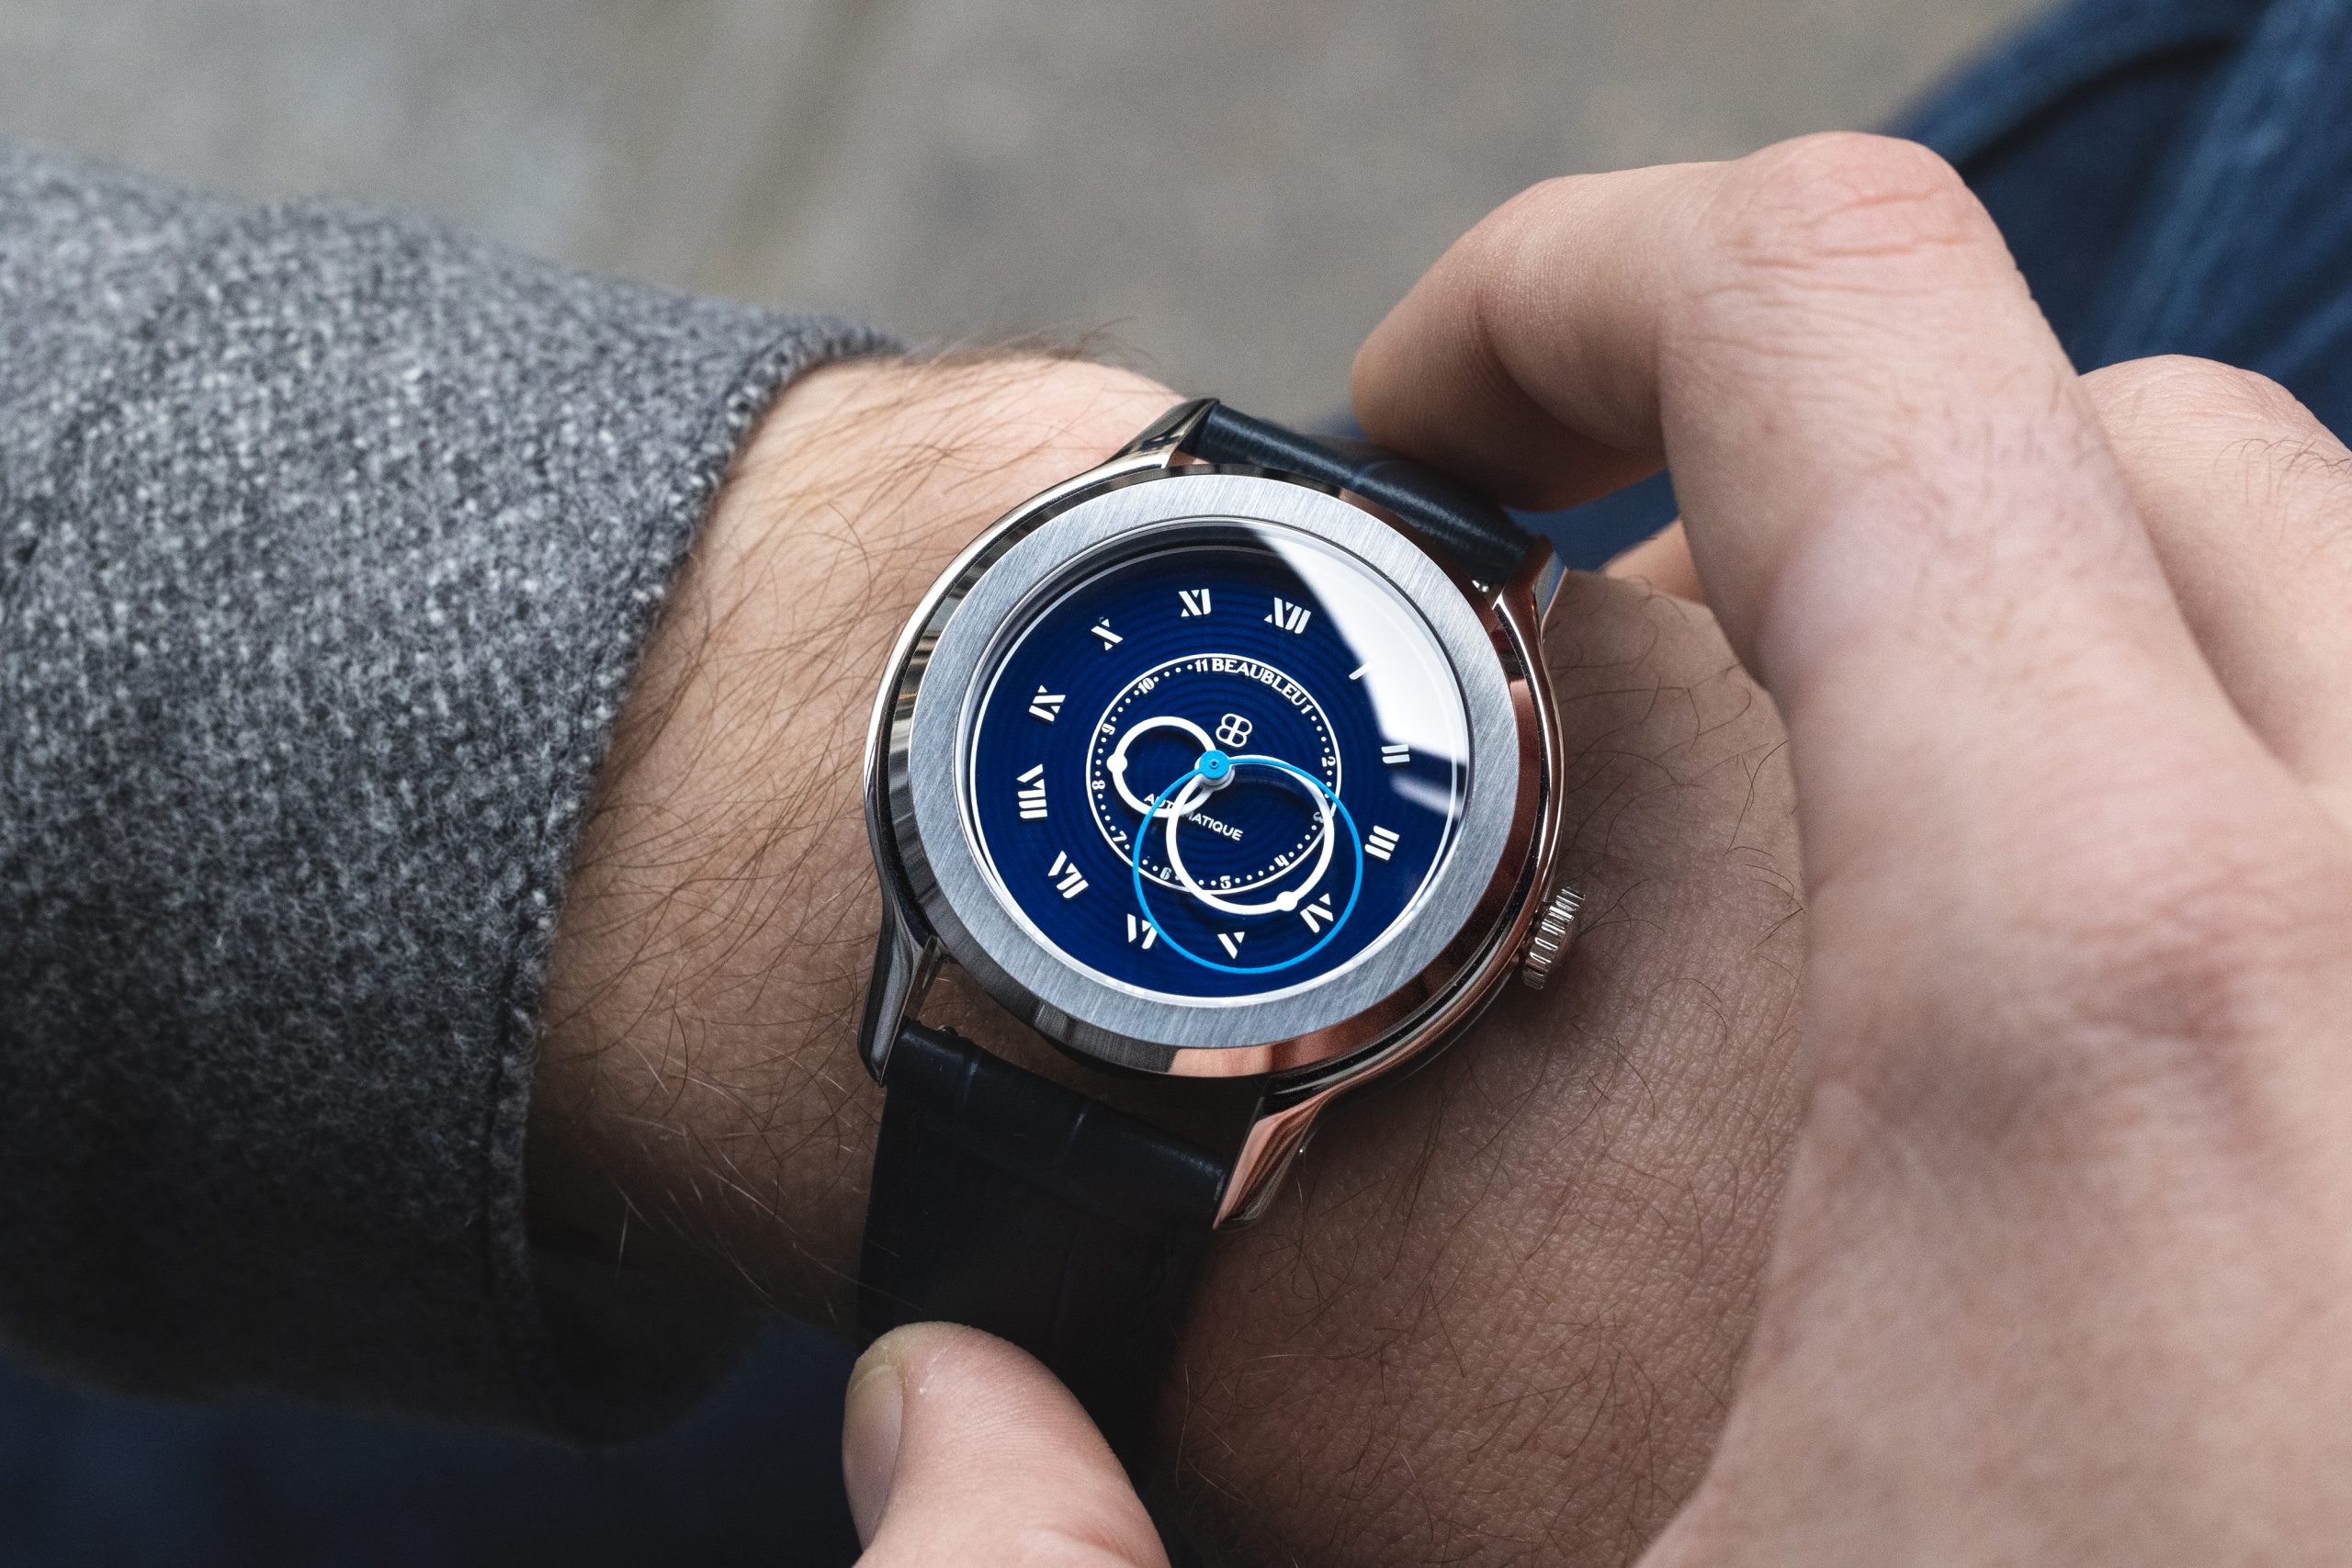 Introducing The Beaubleu Vitruve Watch Collection – WristReview.com –  Featuring Watch Reviews, Critiques, Reports & News